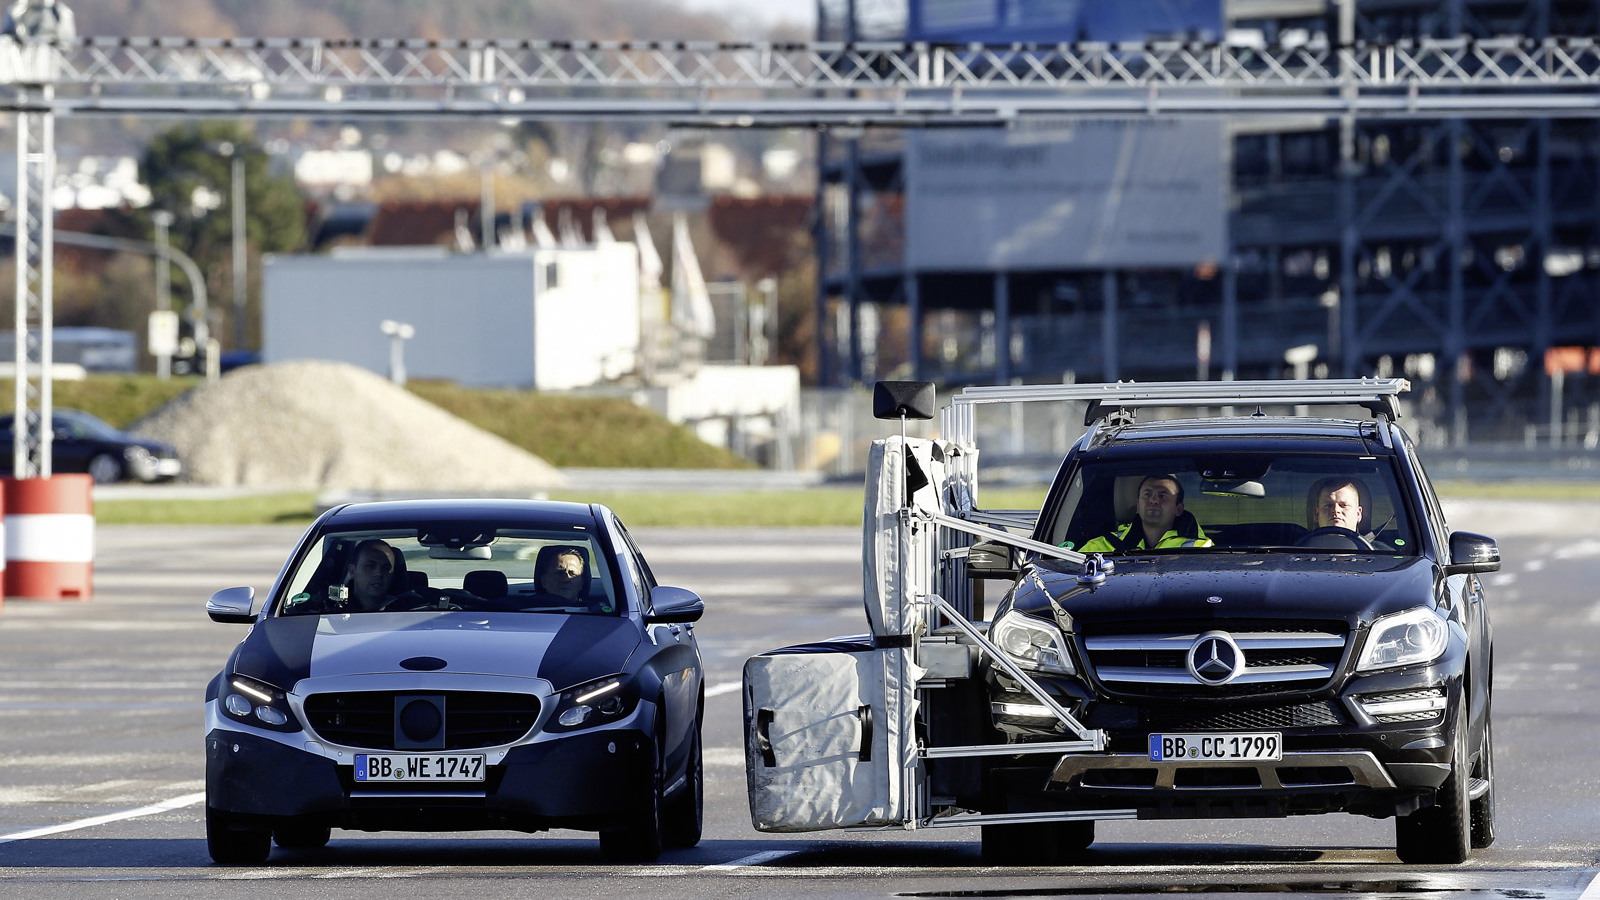 Michael Schumacher tests new assistance systems on the 2015 Mercedes-Benz C-Class